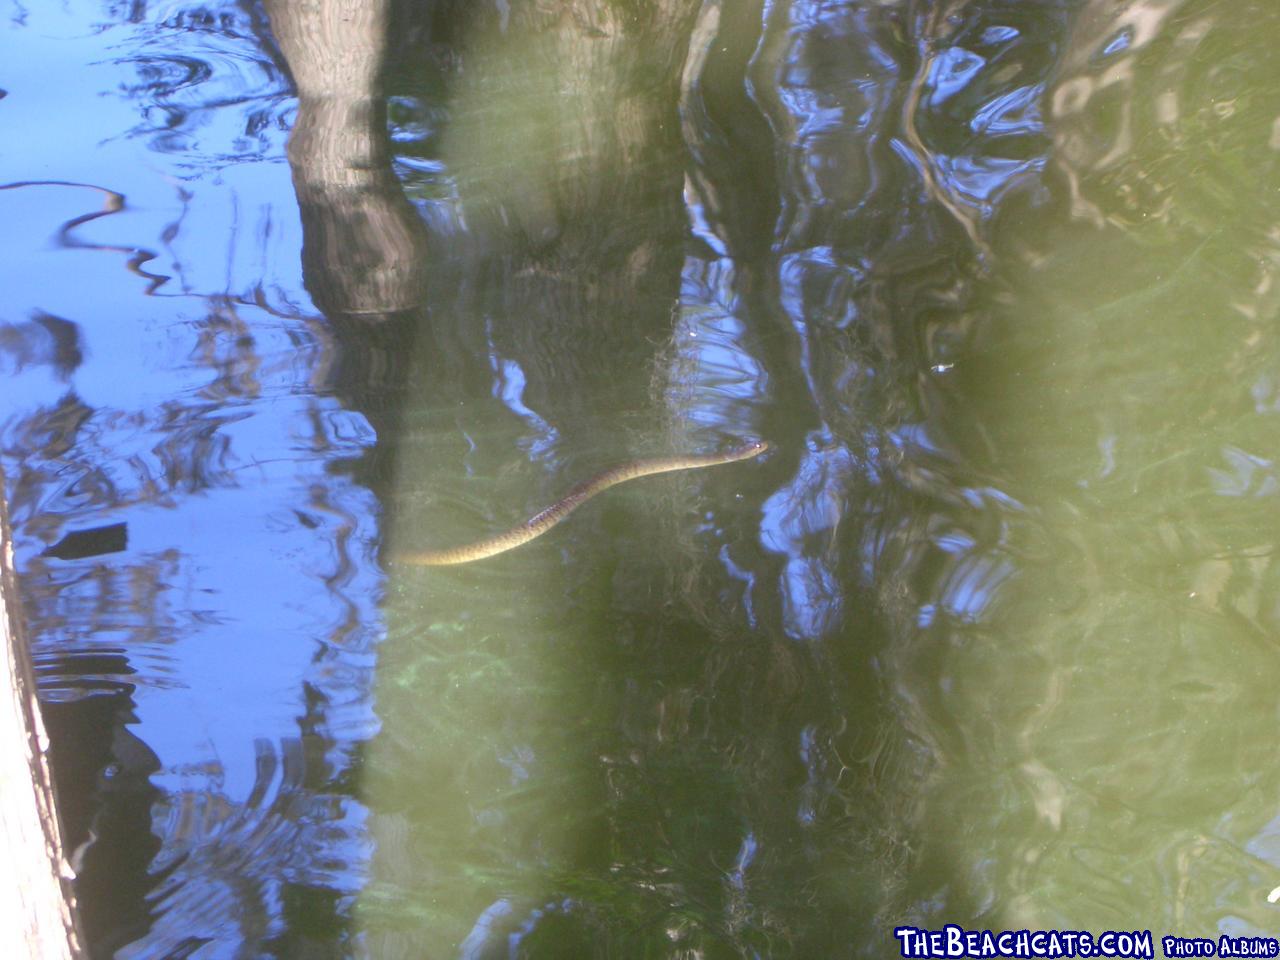 Moccasin or Banded Water Snake?